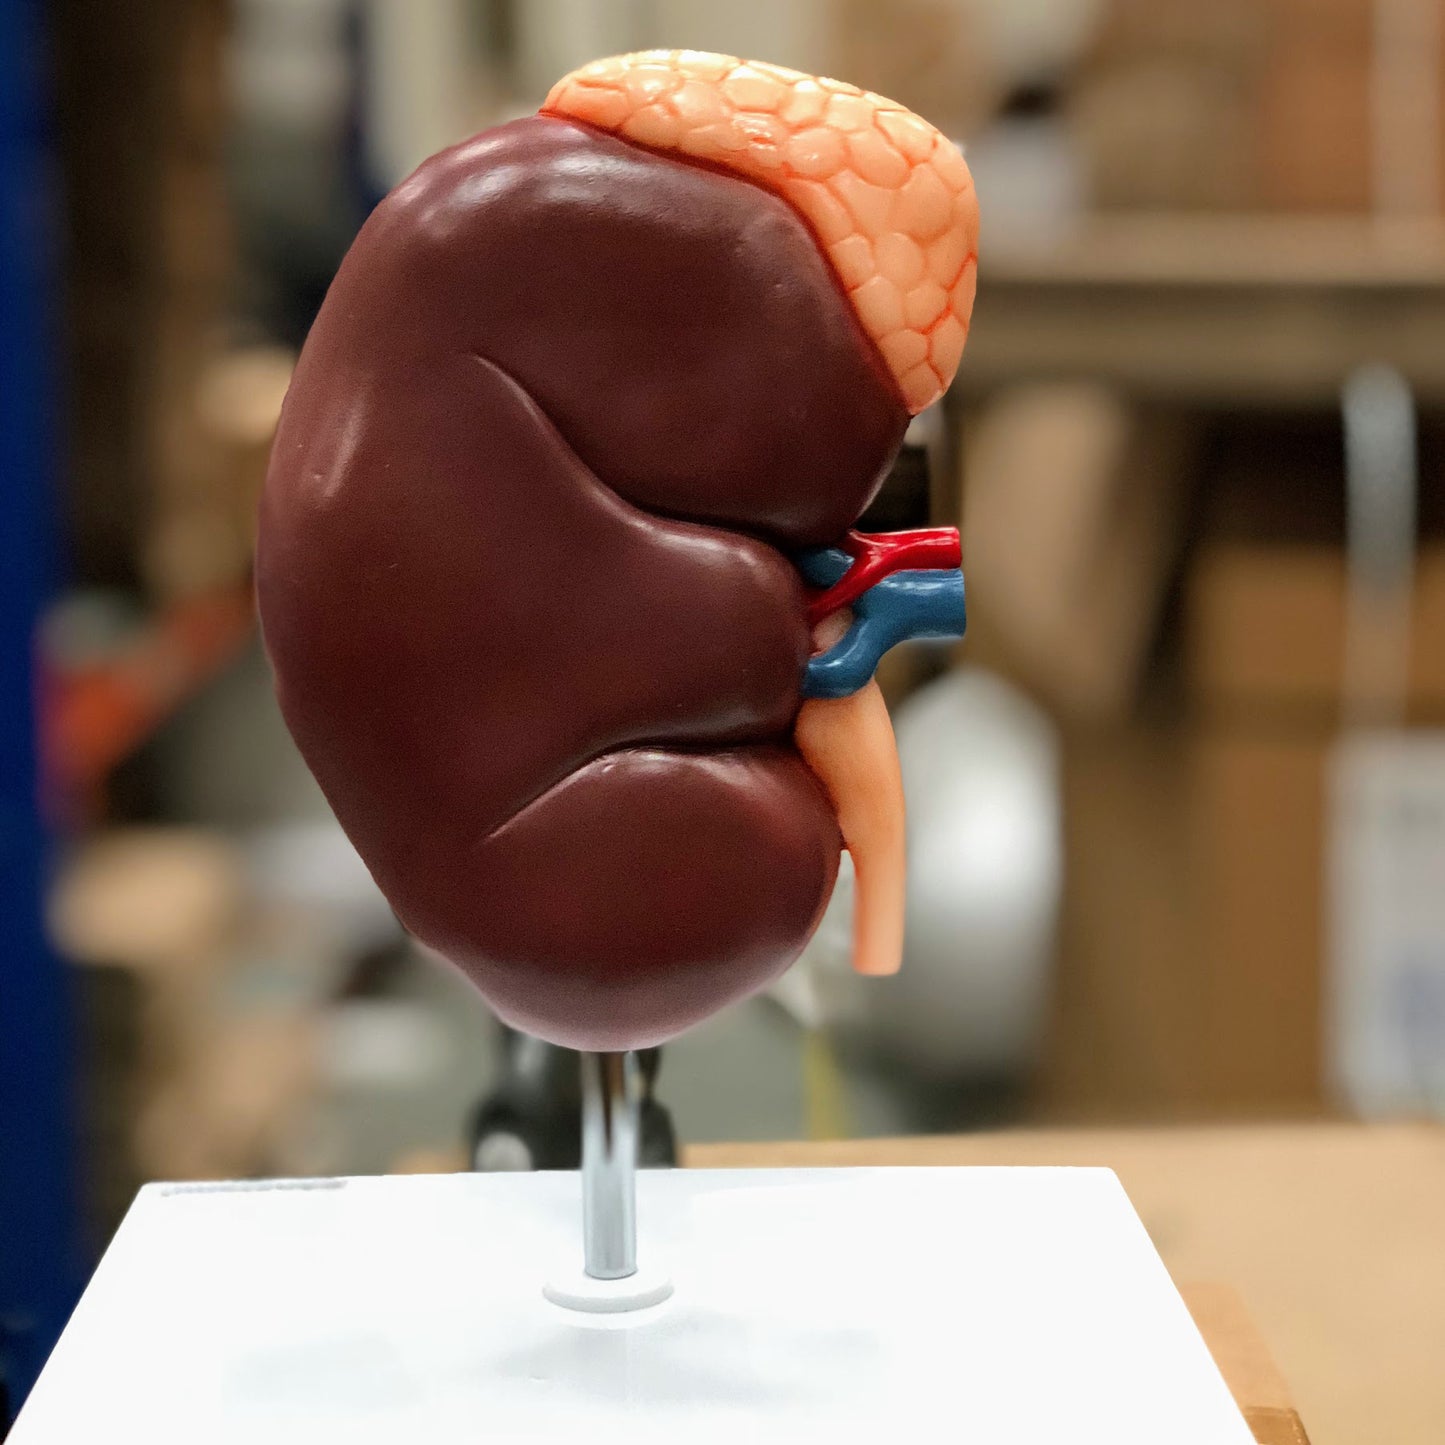 Enlarged kidney model incl. the adrenal gland showing a longitudinal section of the kidney